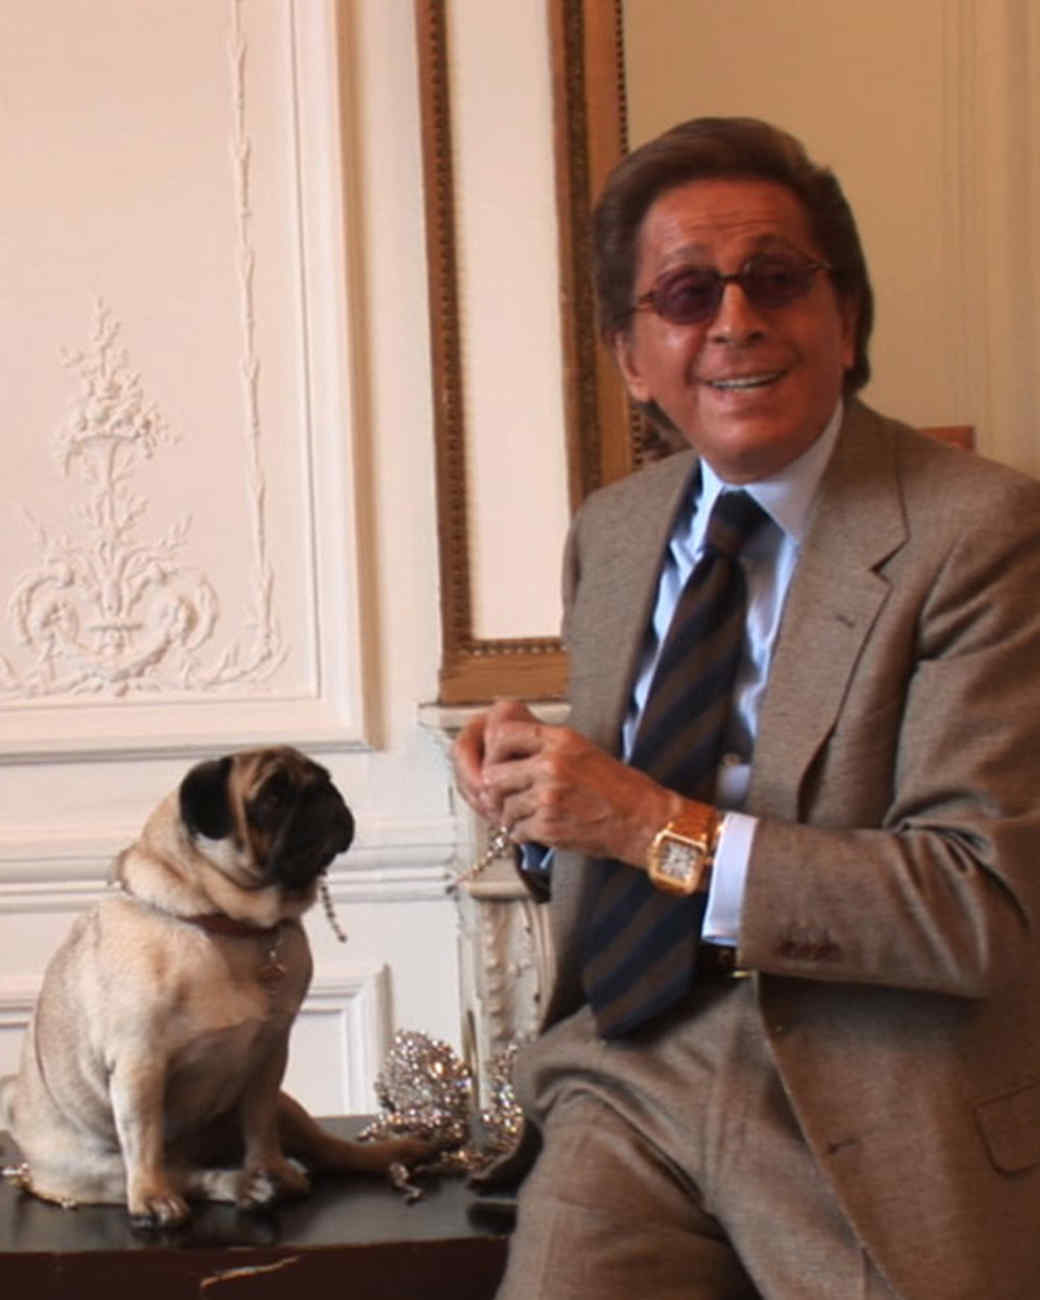 Valentino with his pug on the table